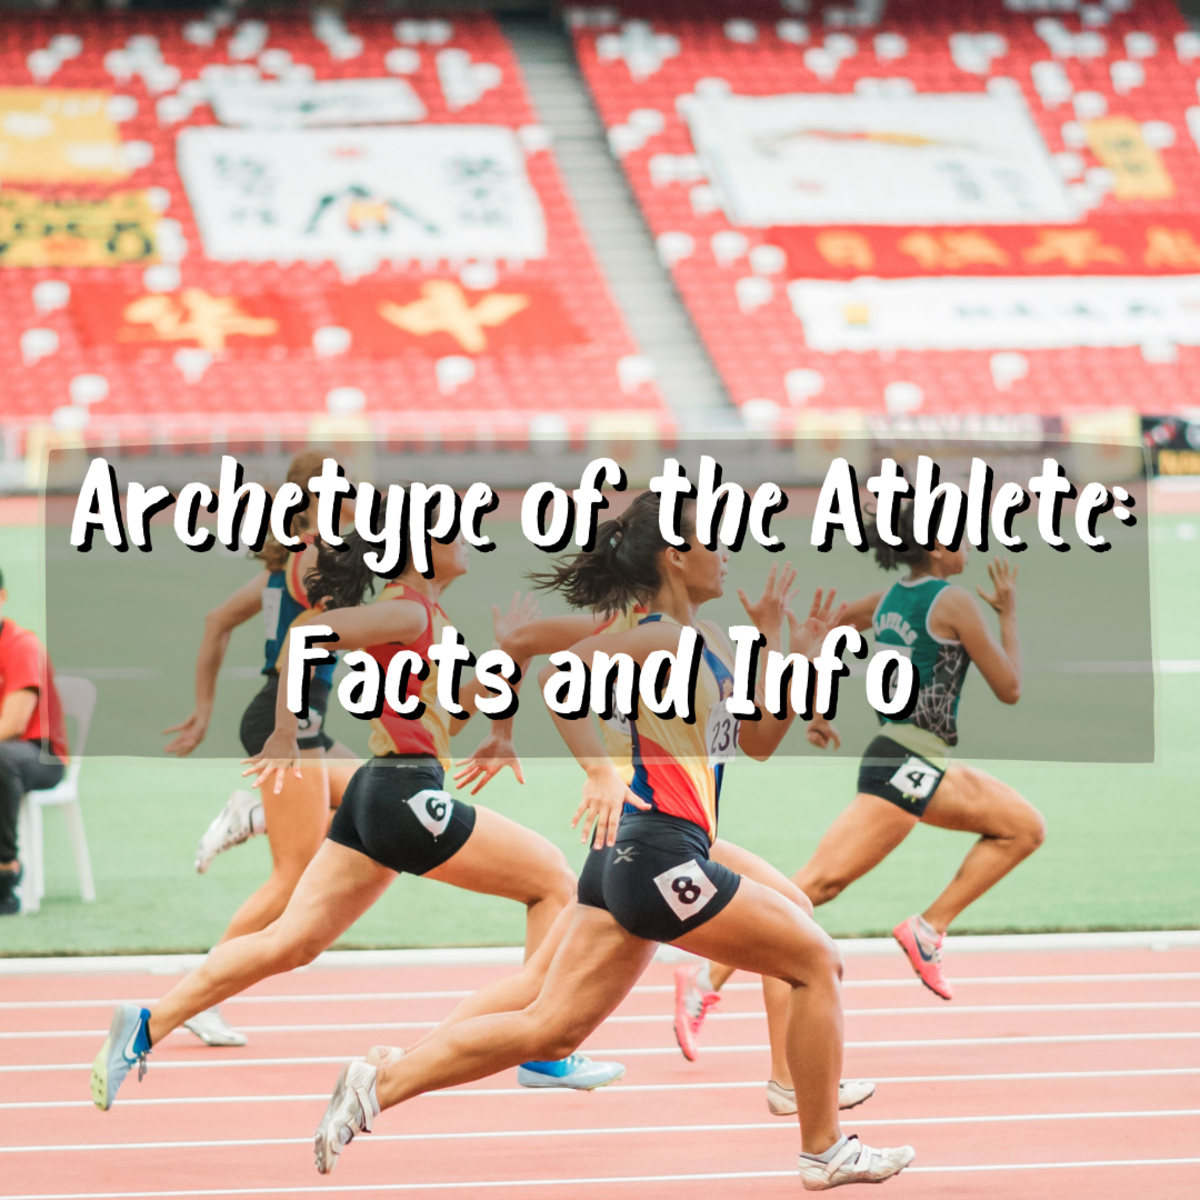 Read on to learn all about the Athlete archetype.